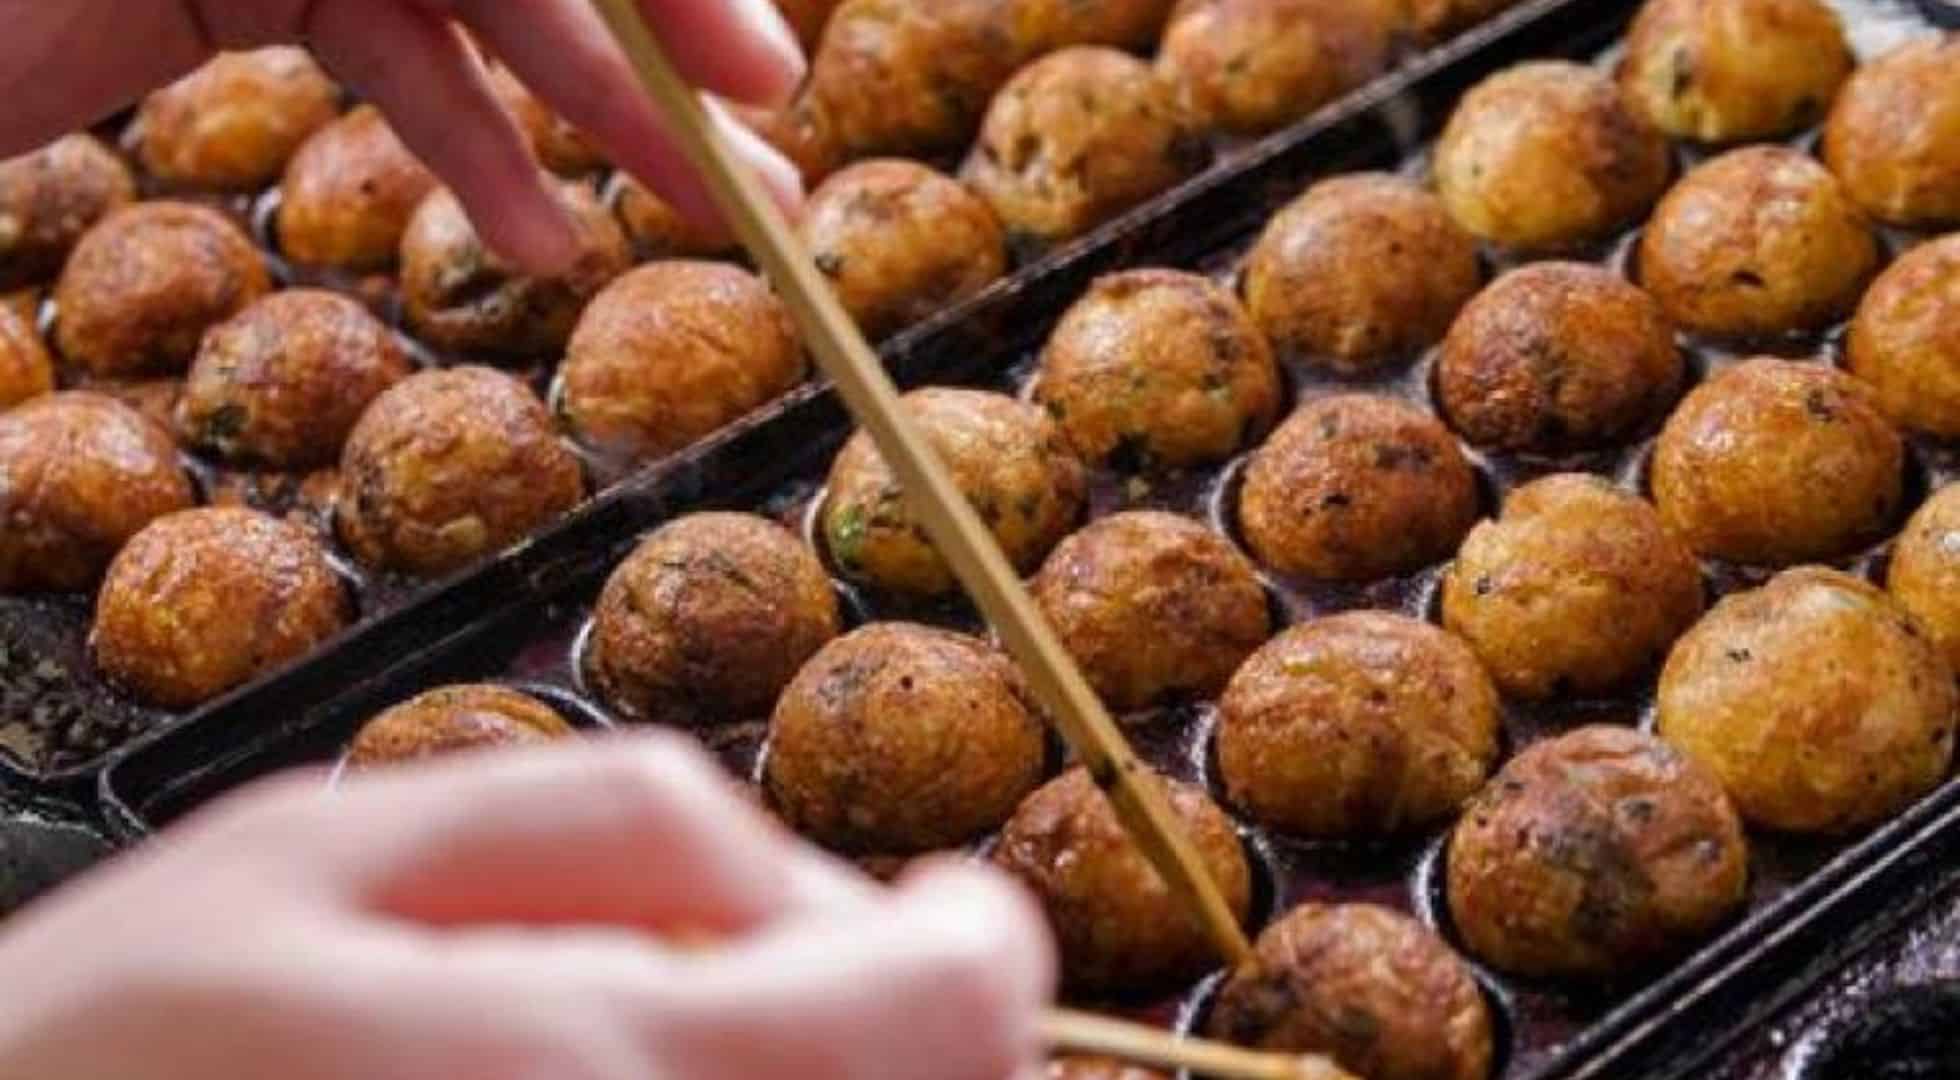 Image of takoyaki squid balls which is a popular street featured in the best food festivals in Japan.